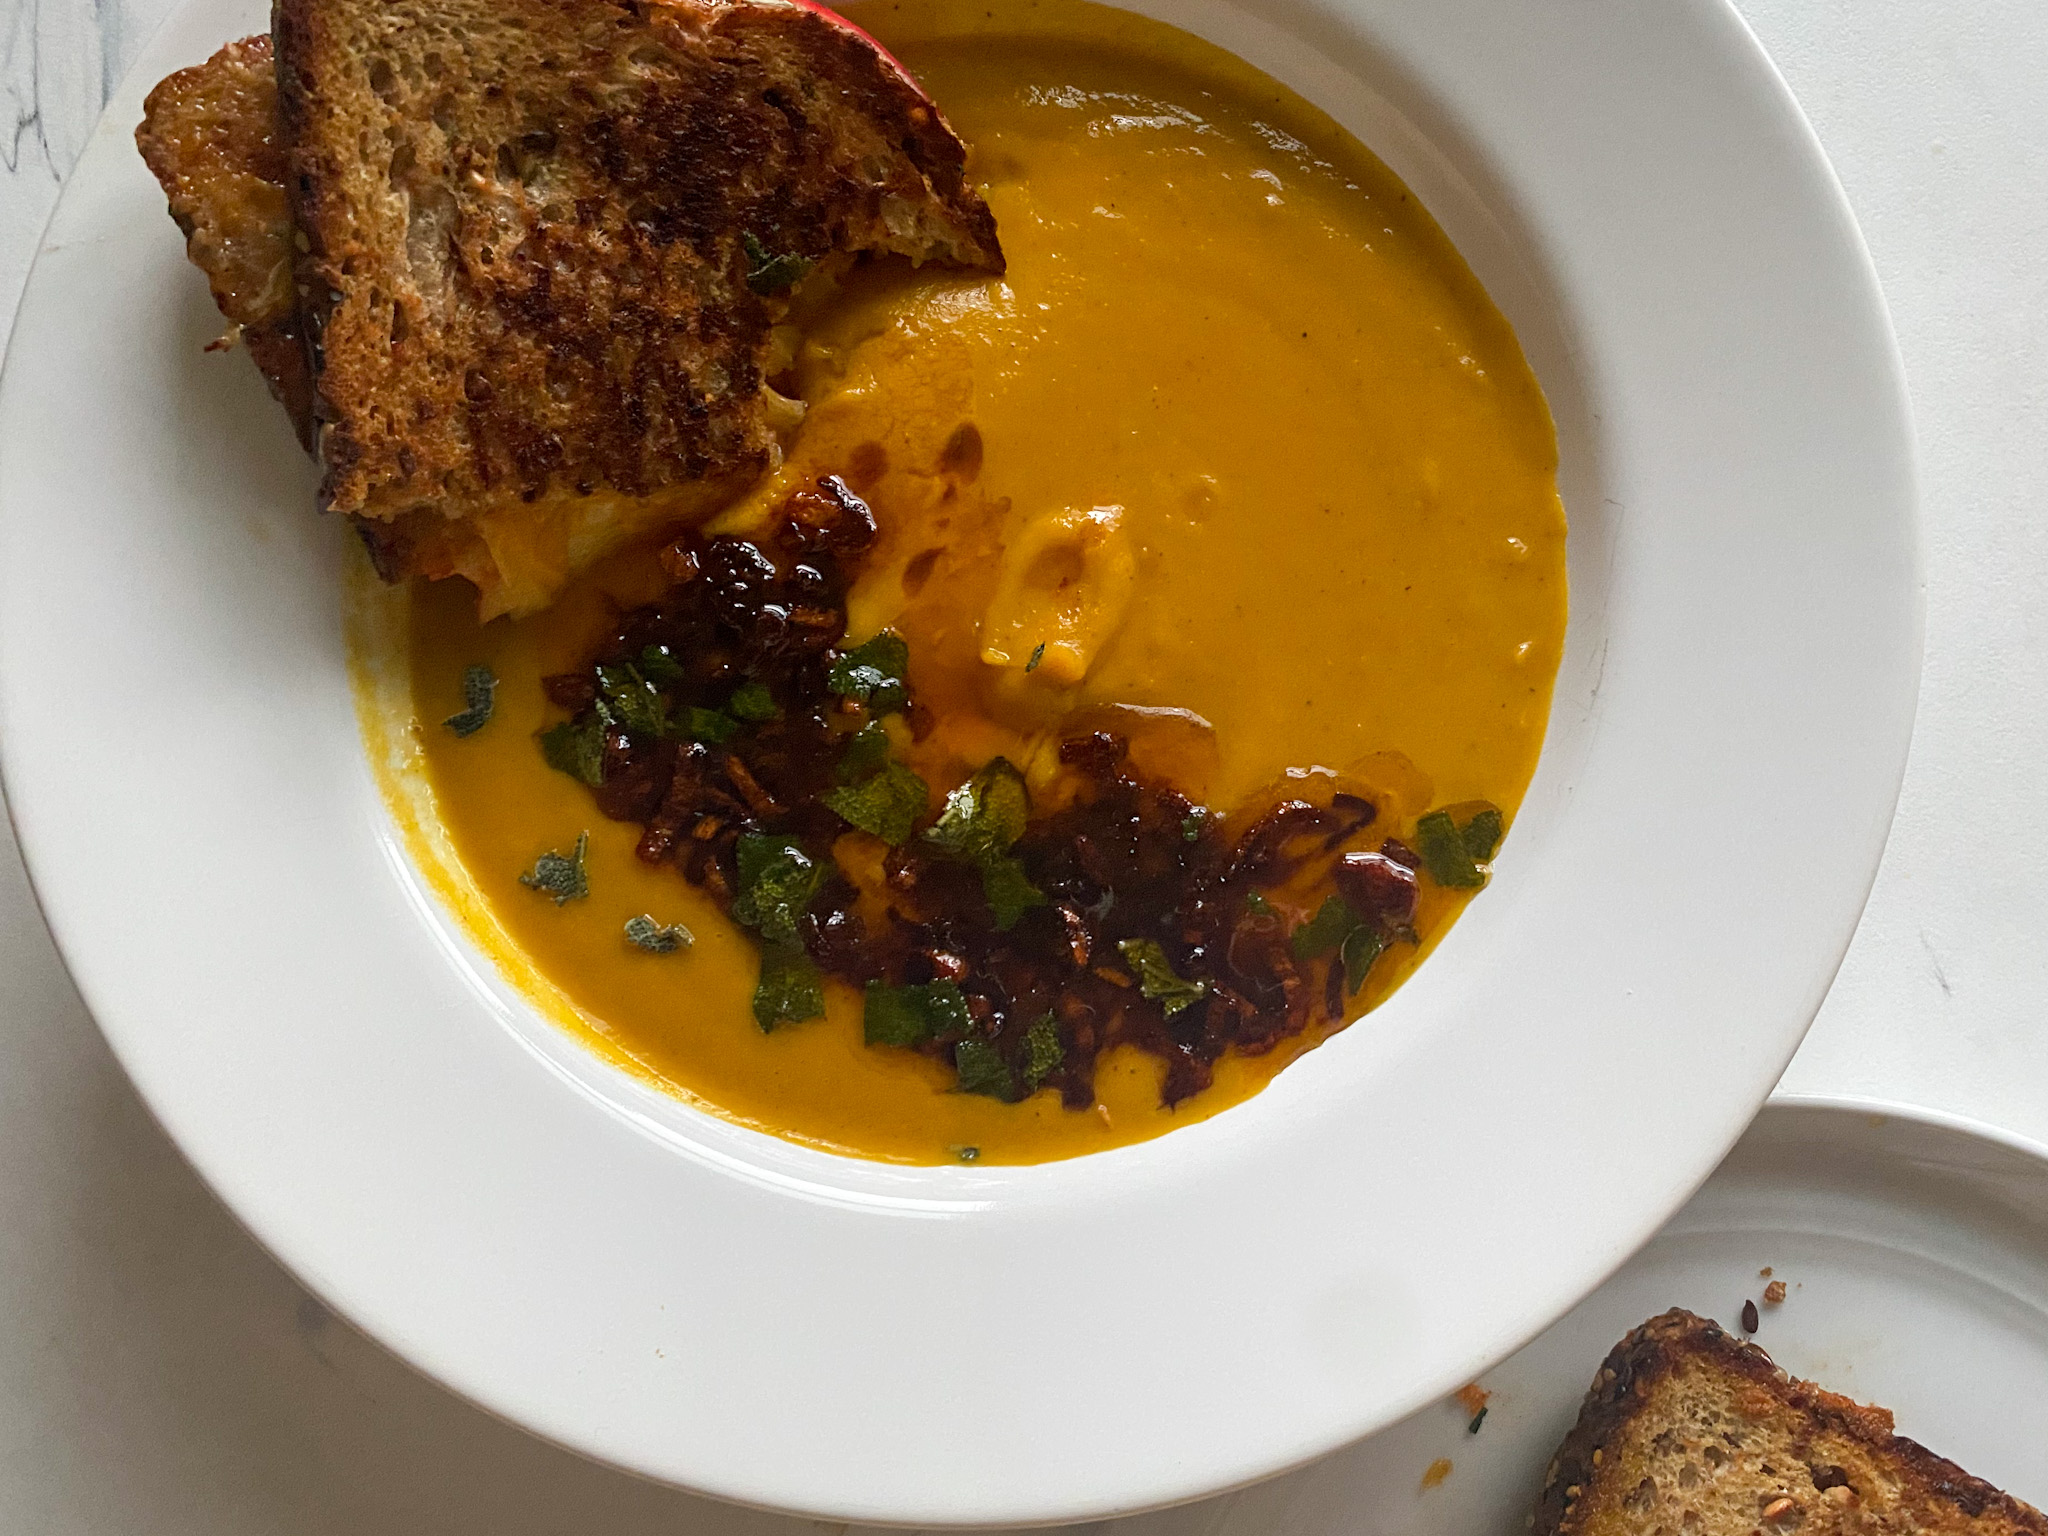 Grilled Cheese and Butternut Squash Soup